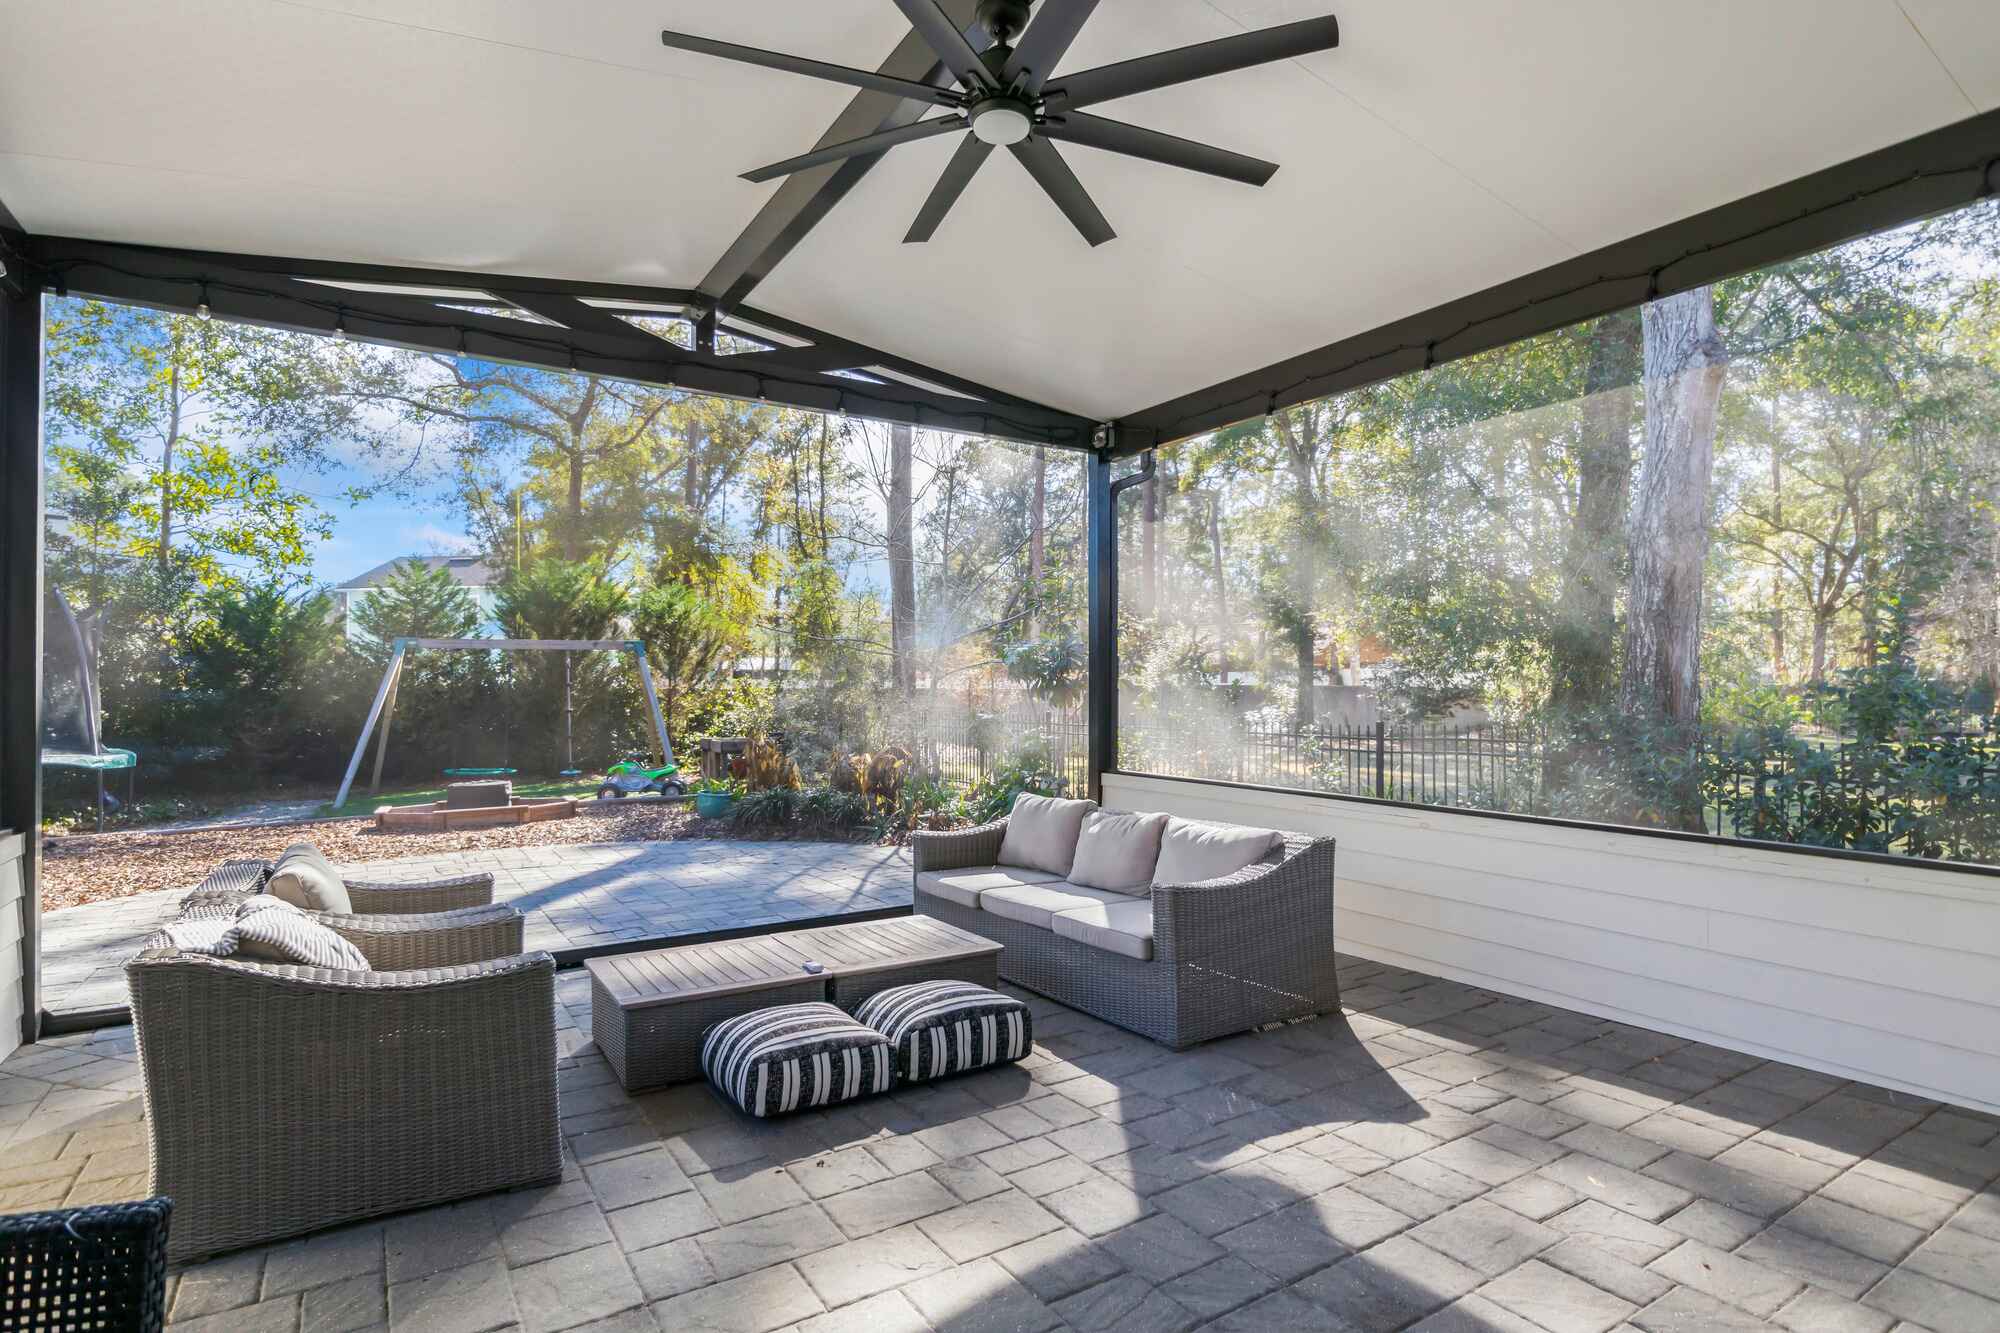 Florida Patio with Motorized Screens